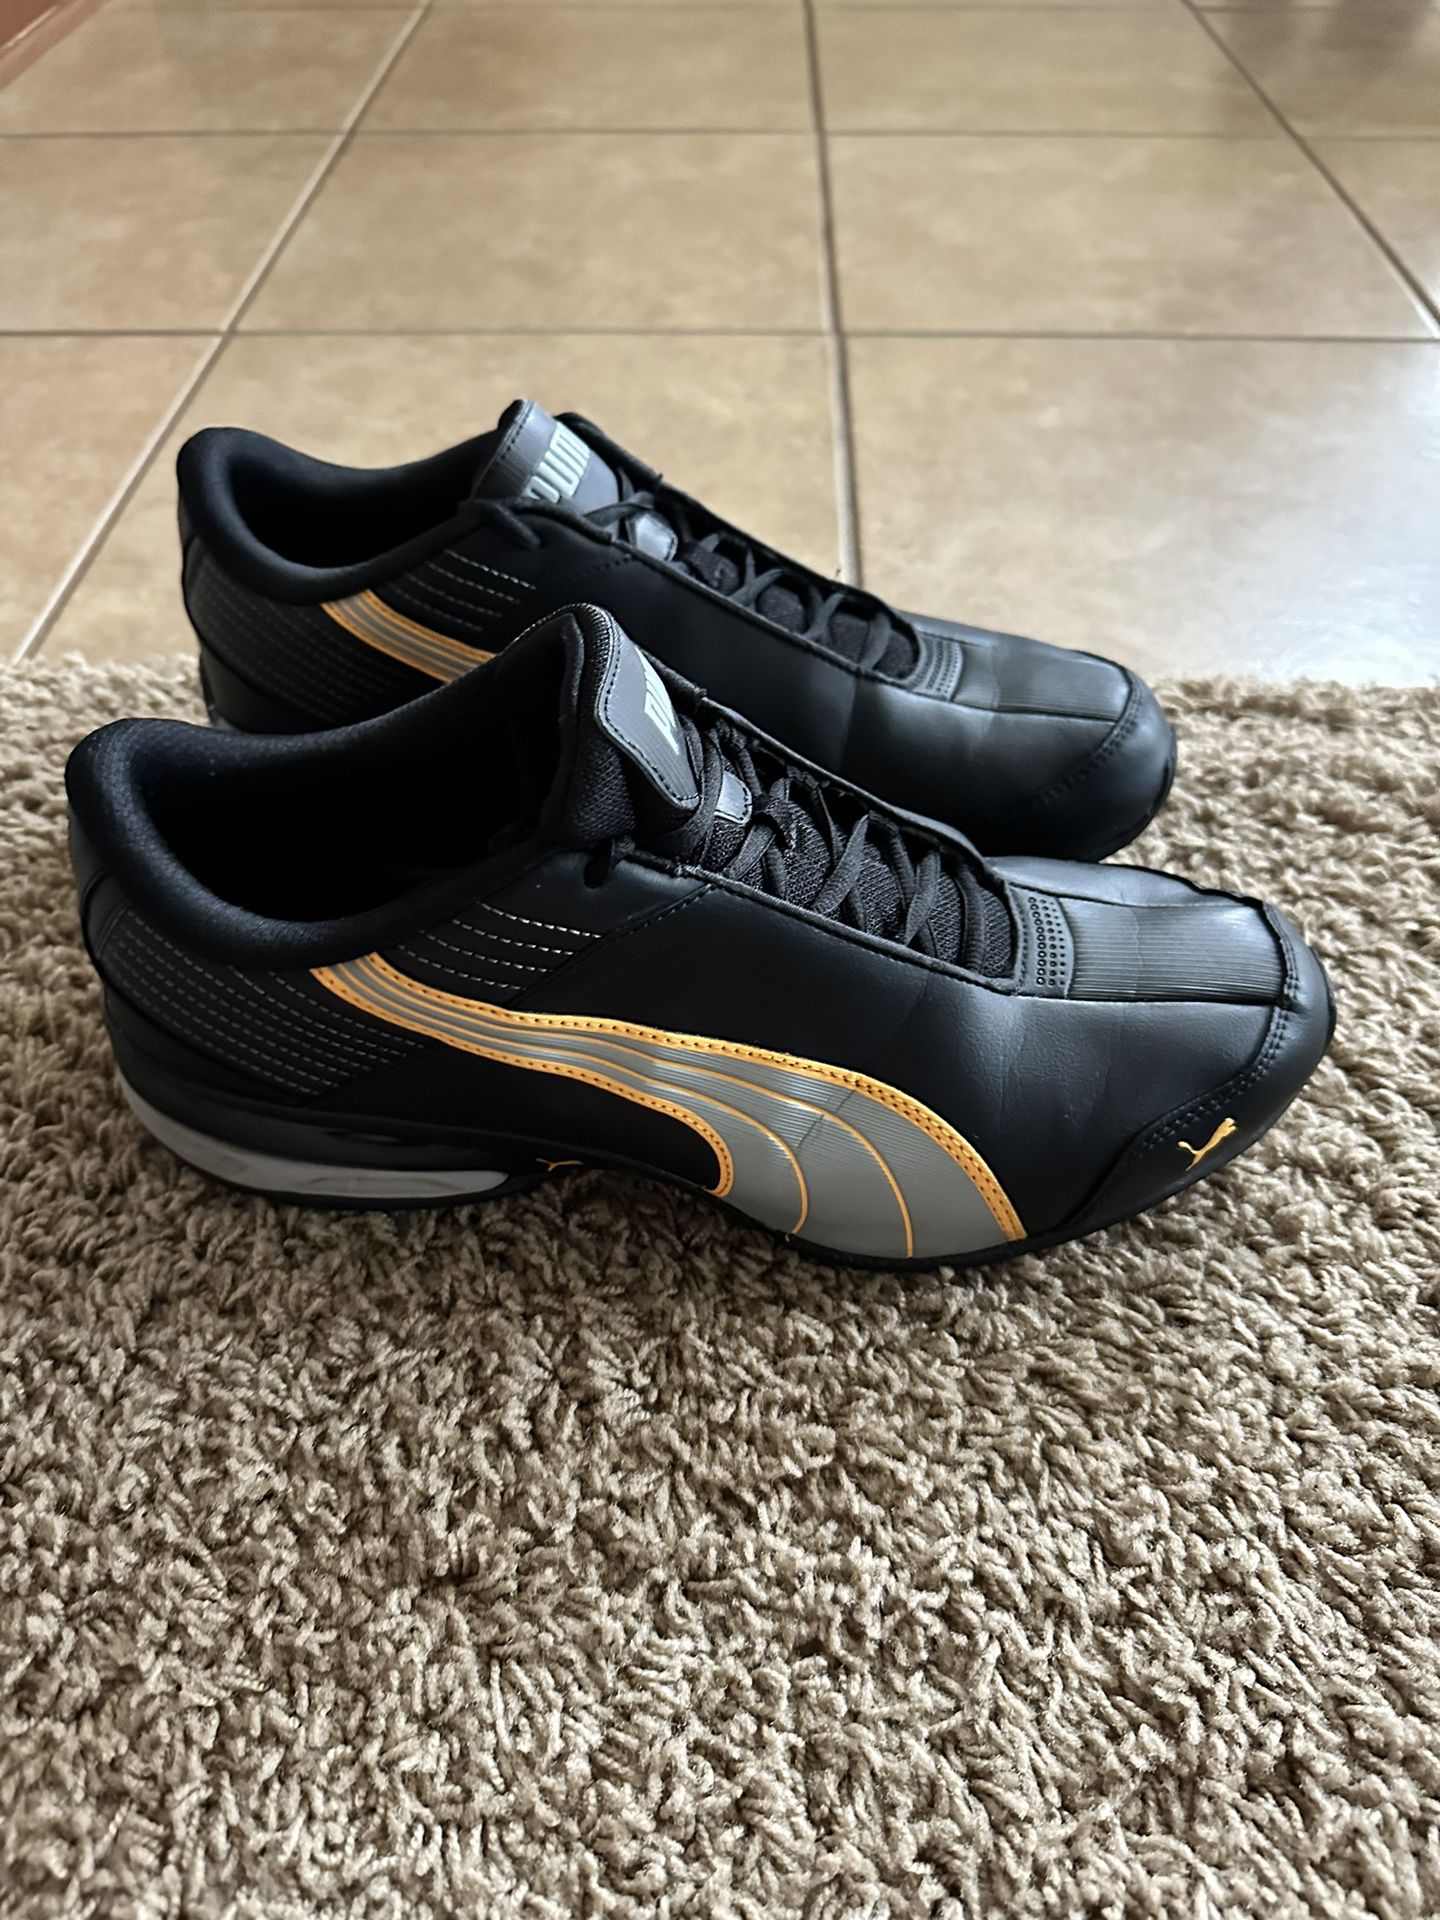 Pair Of black Puma Shies For Men Size 13 Used Twice